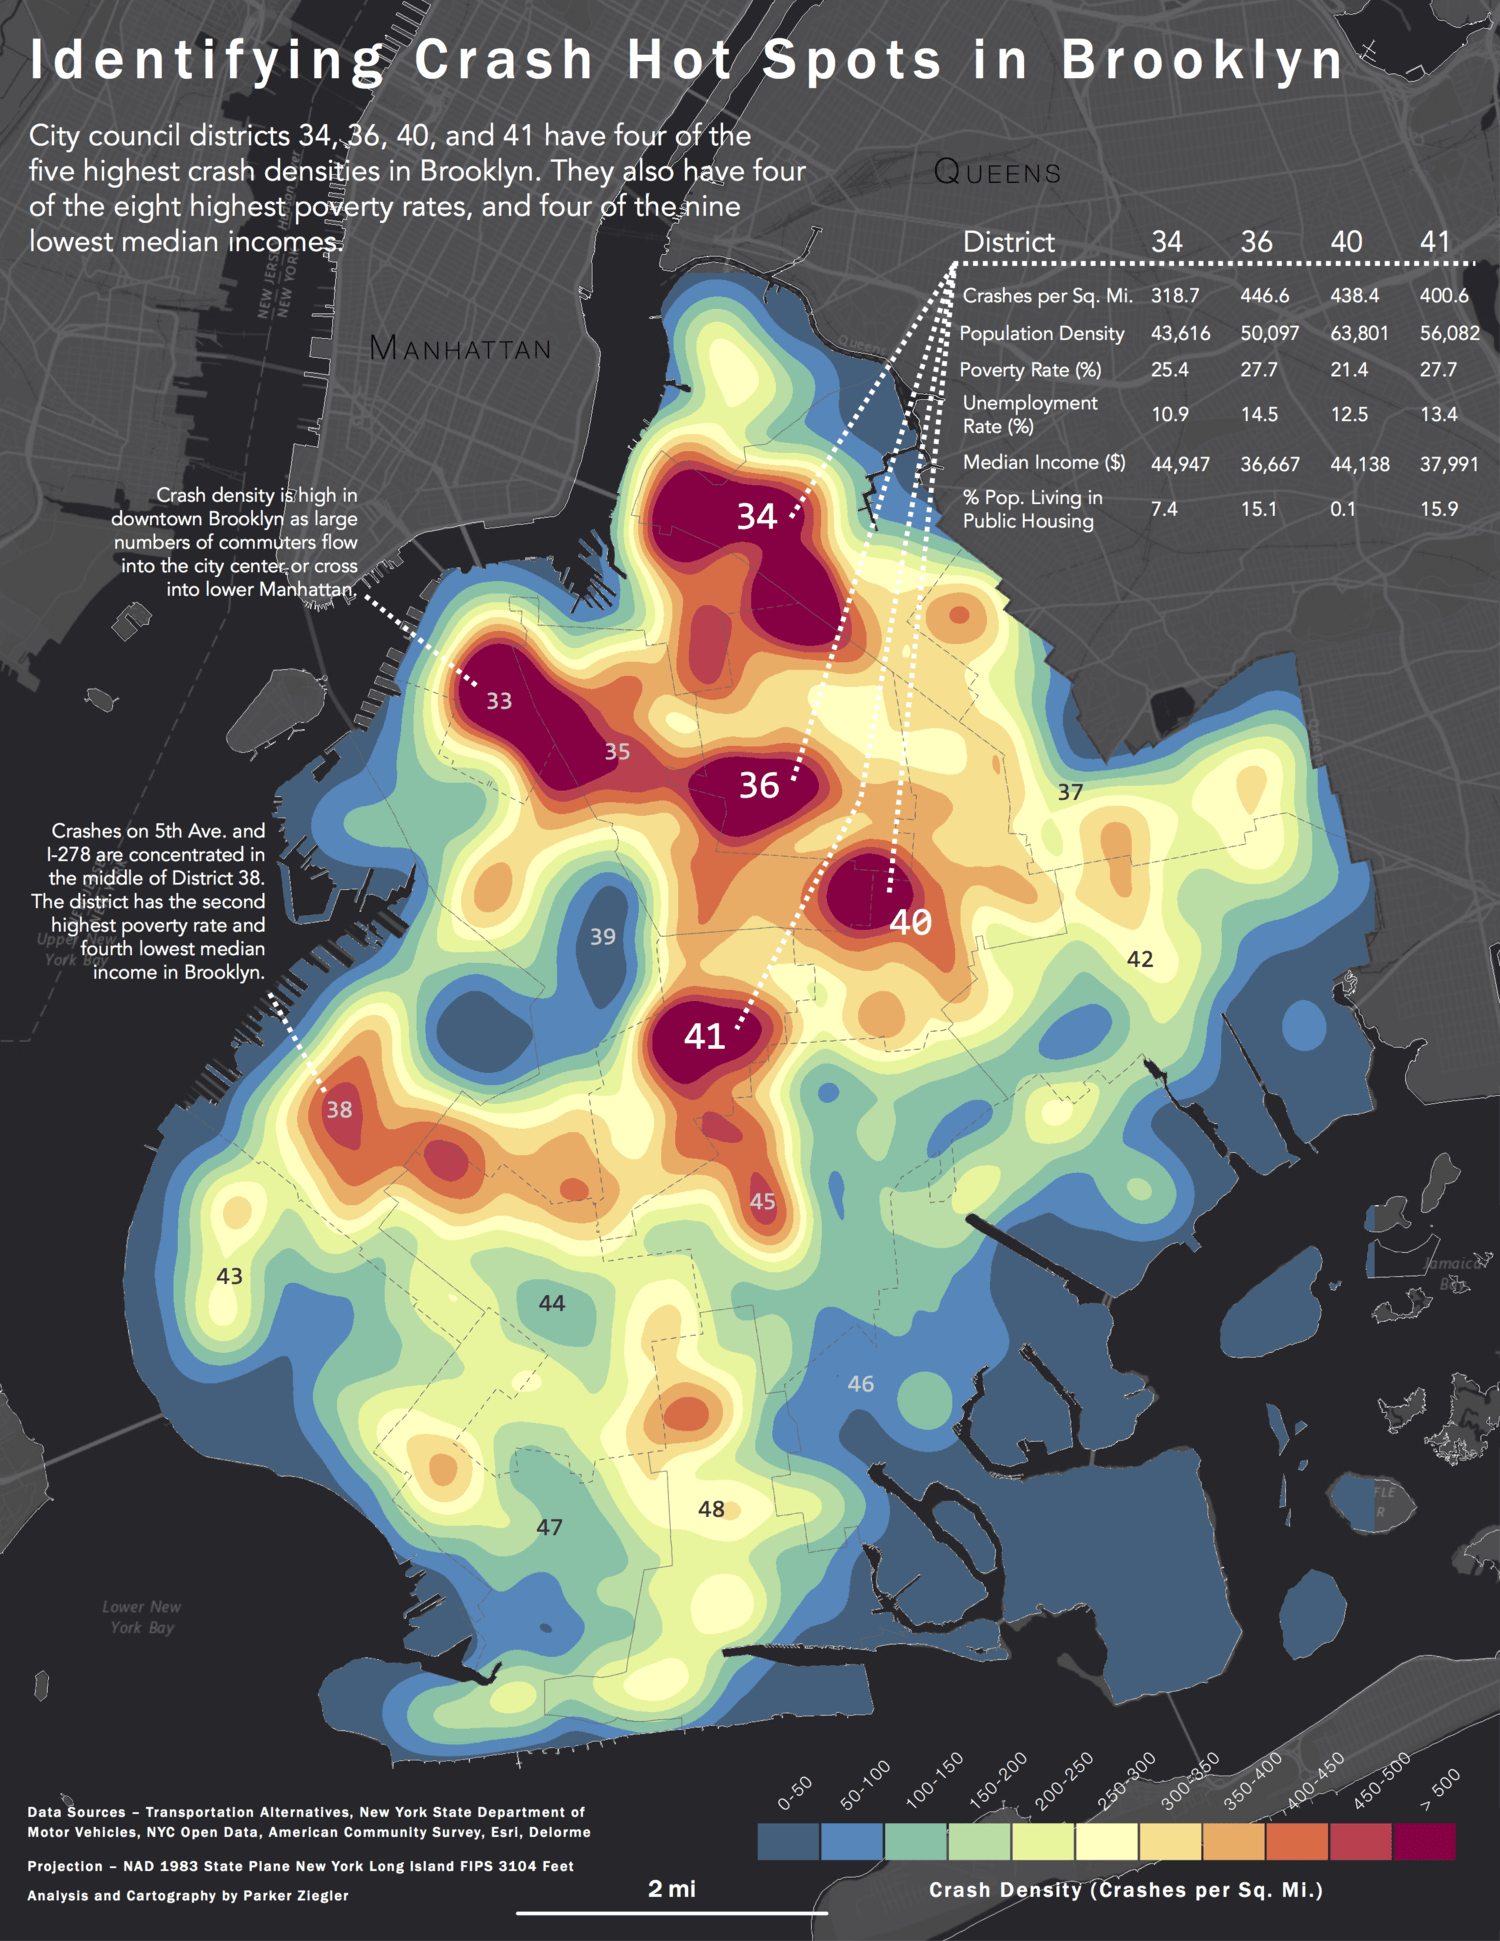 A heat map of traffic crashes in Brooklyn, New York between 2013 and 2015.